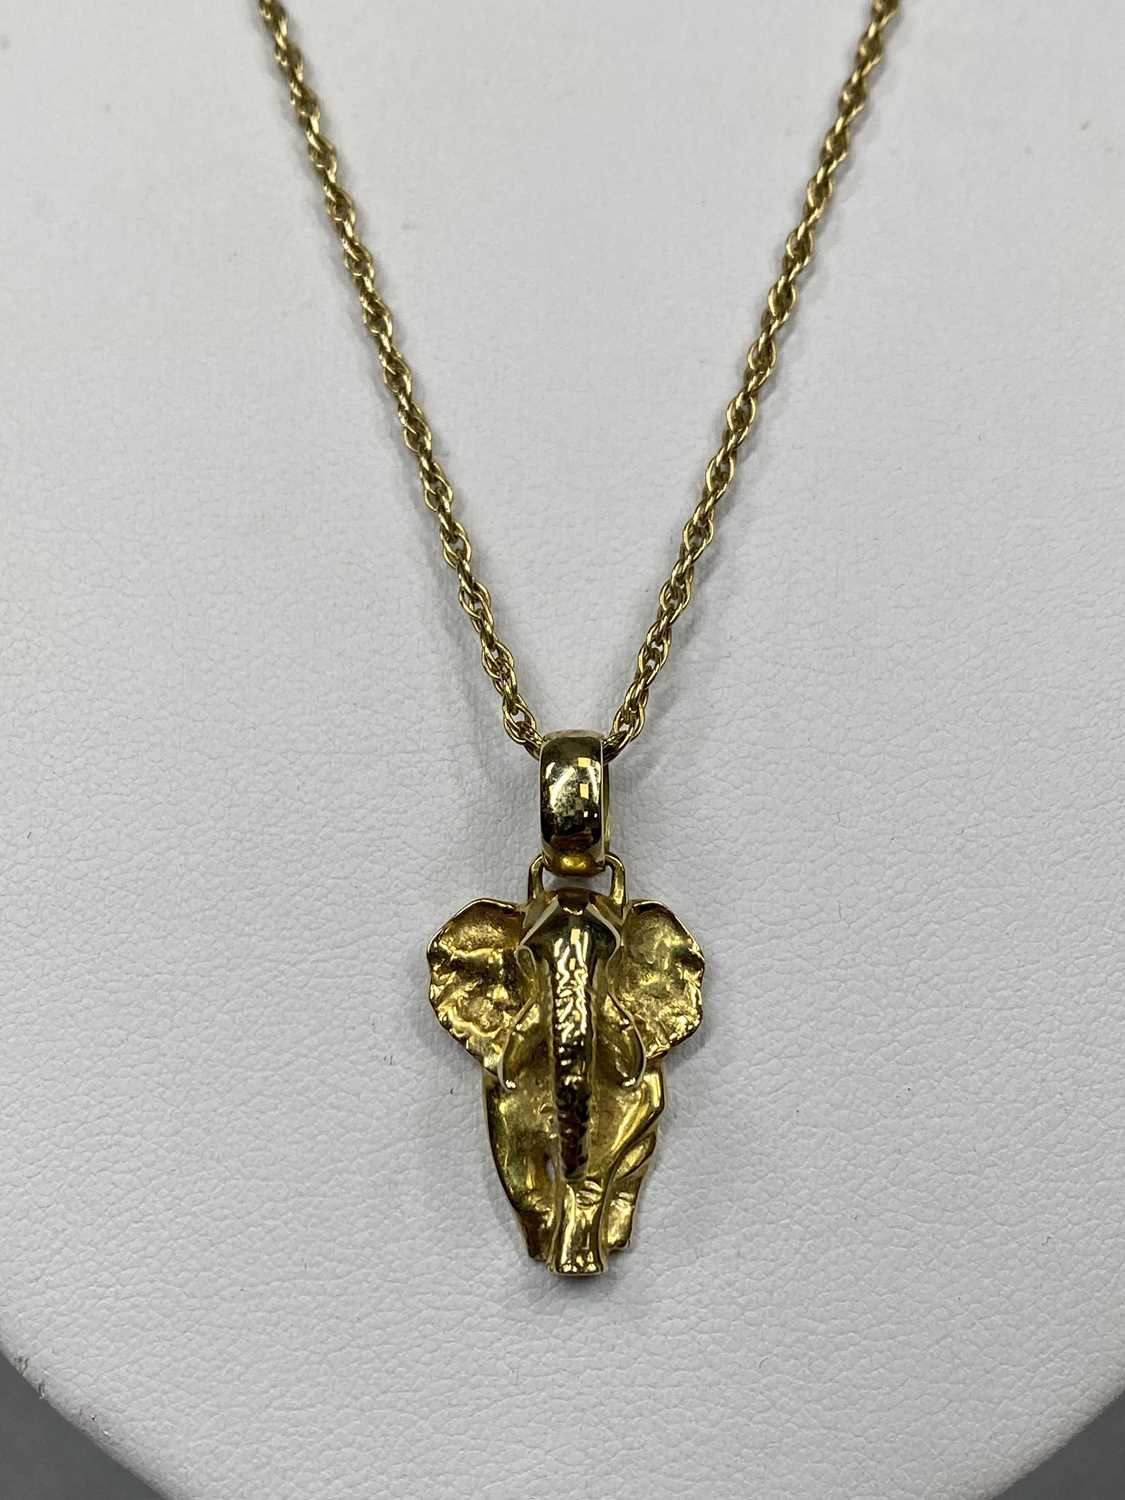 9CT GOLD ELEPHANT PENDANT NECKLACE, 3cms (l) including jump ring the pendant, 25.5cms (overall), 7. - Image 2 of 4